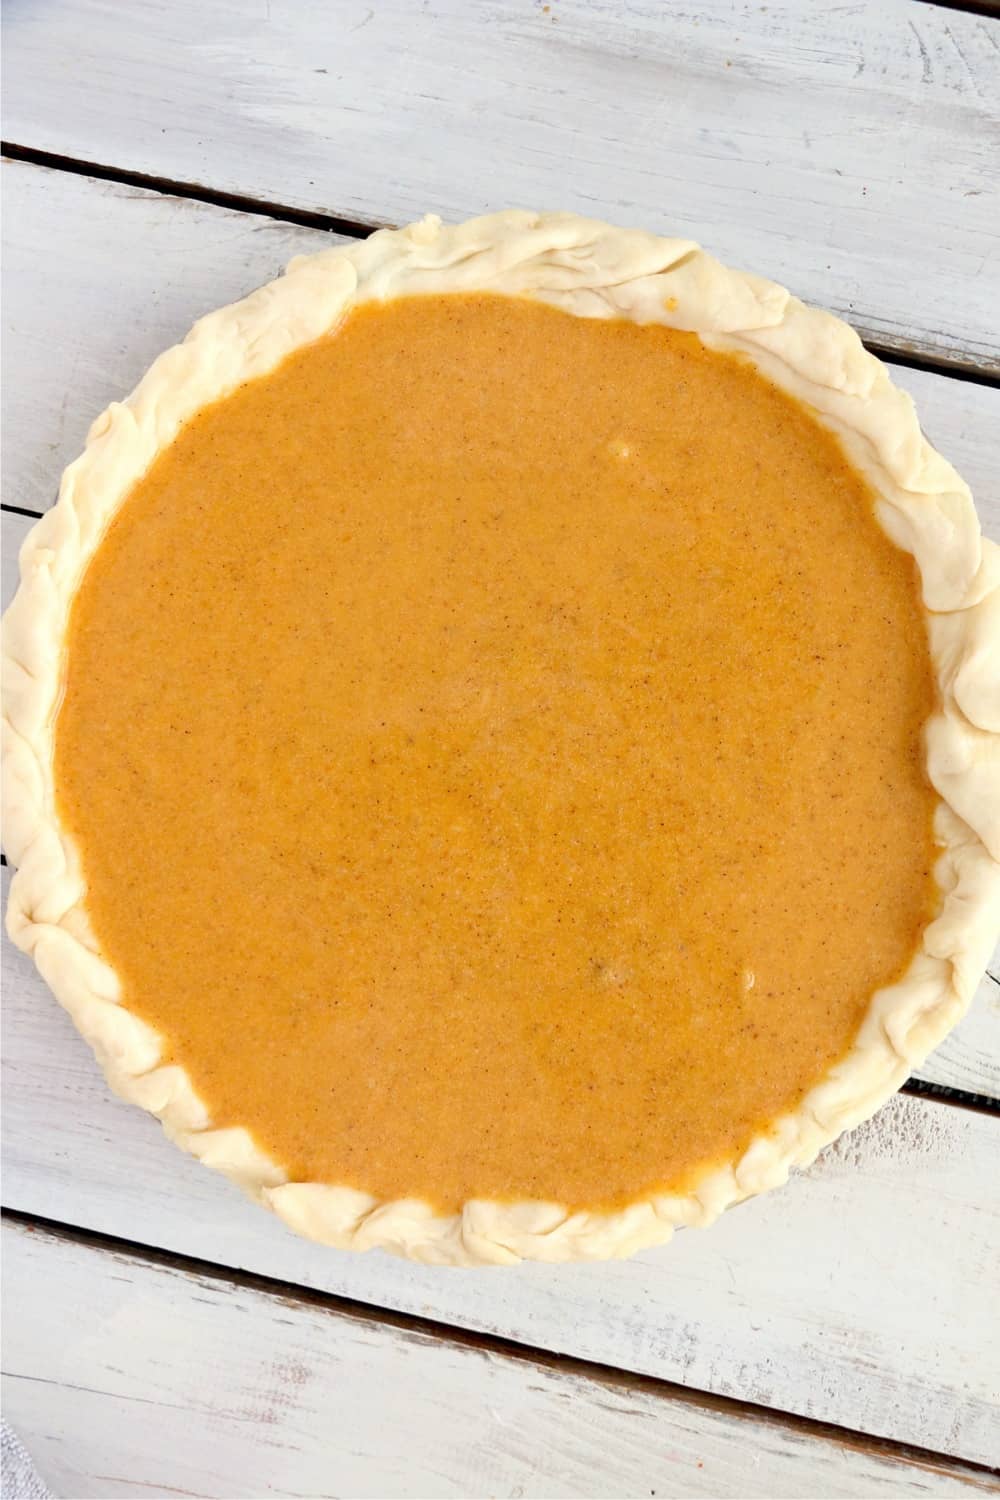 Pumpkin pie crust with filling ready to go into the oven.